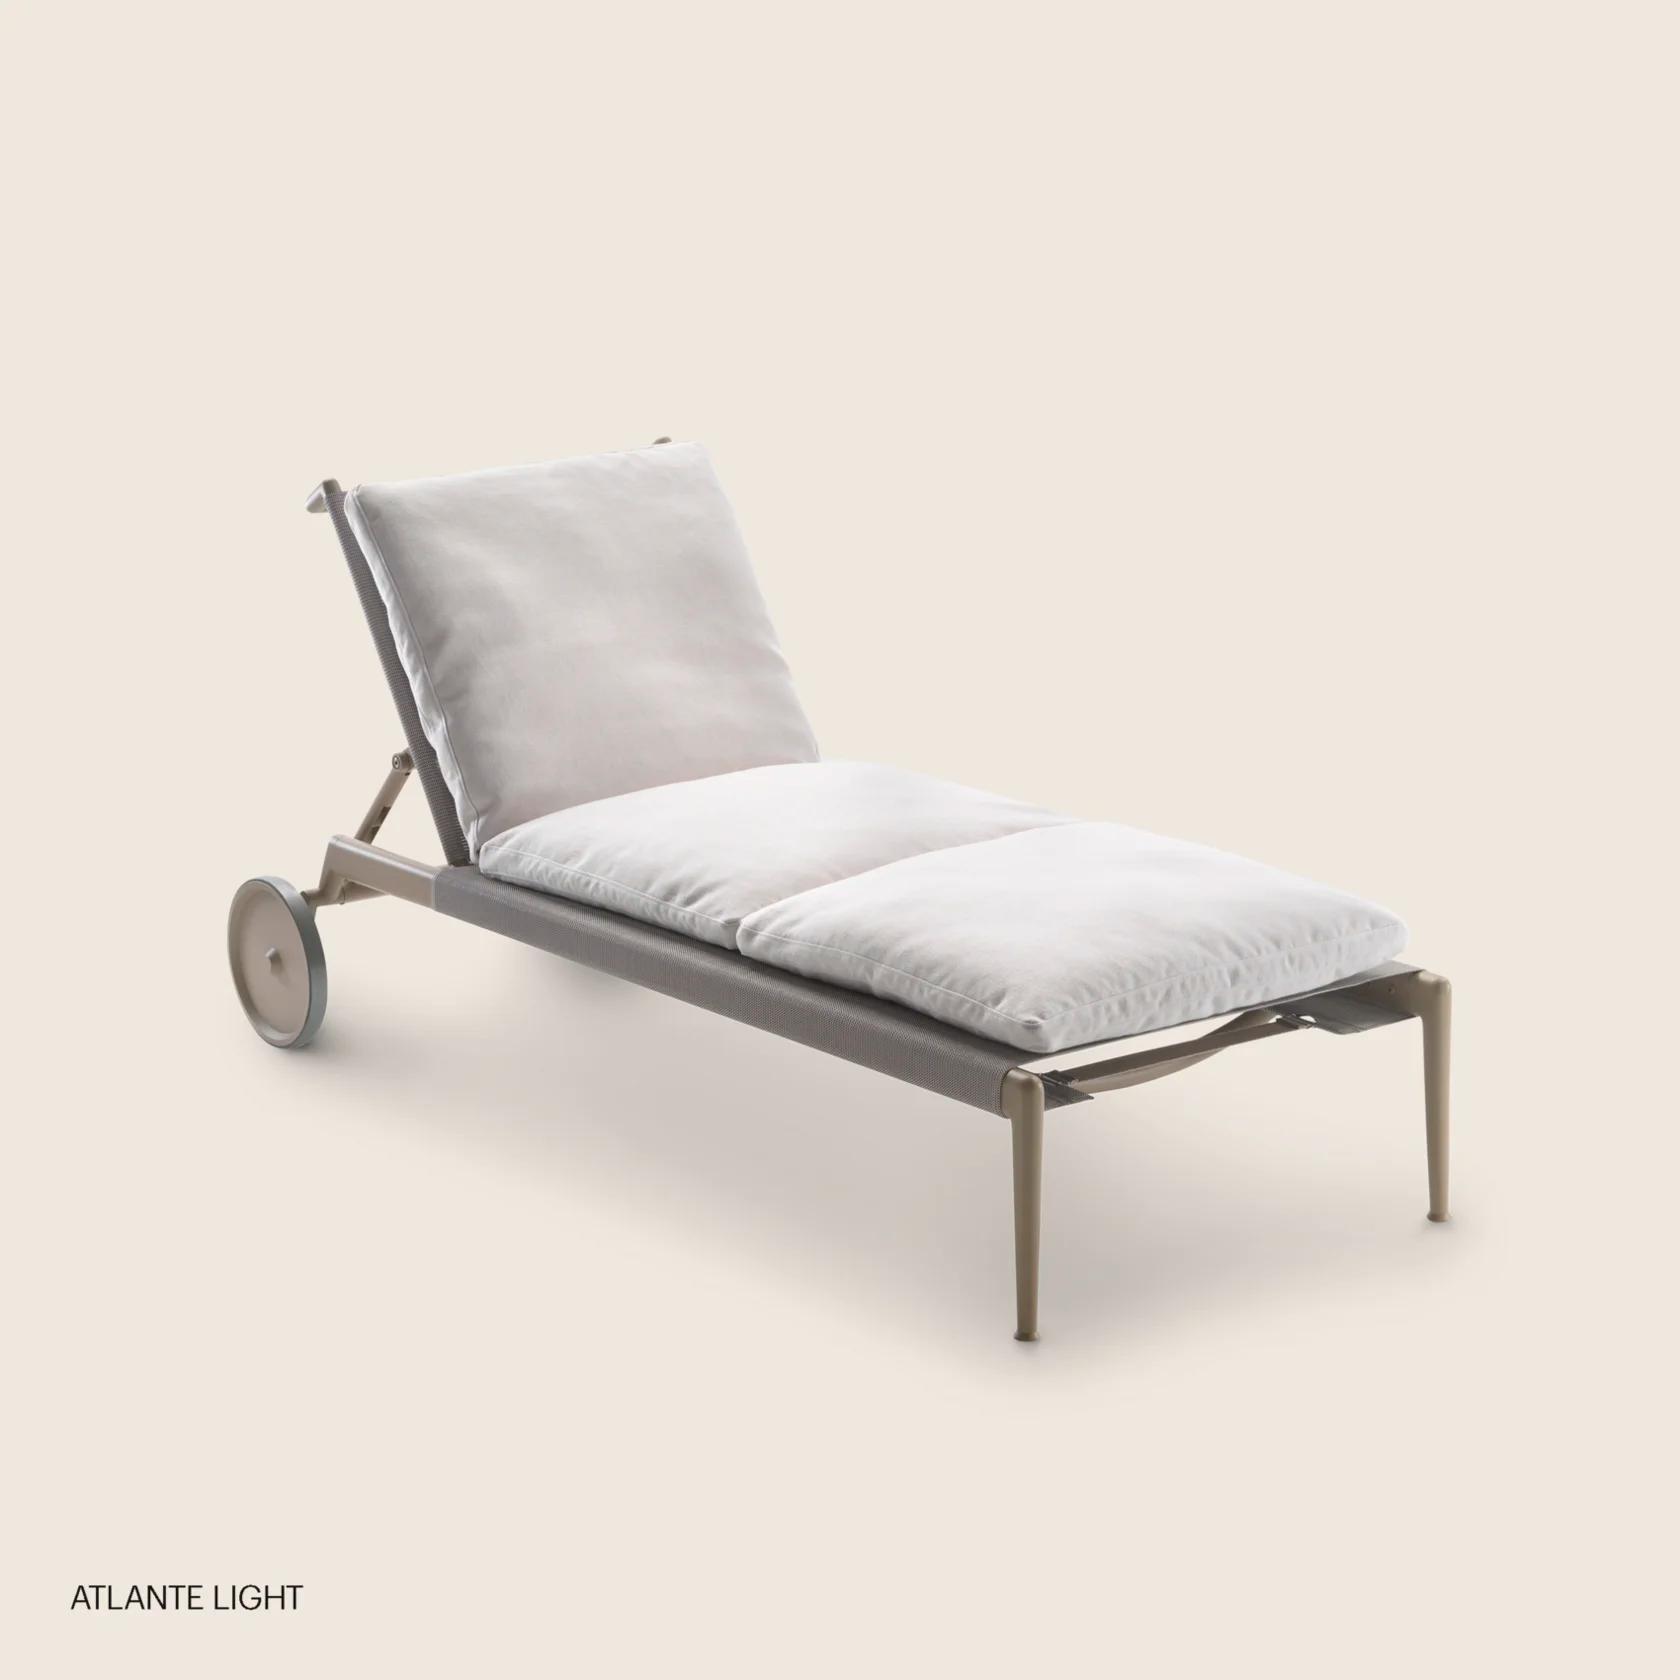 02A4G9_ATLANTE LIGHT_DAYBED_01_dida.png